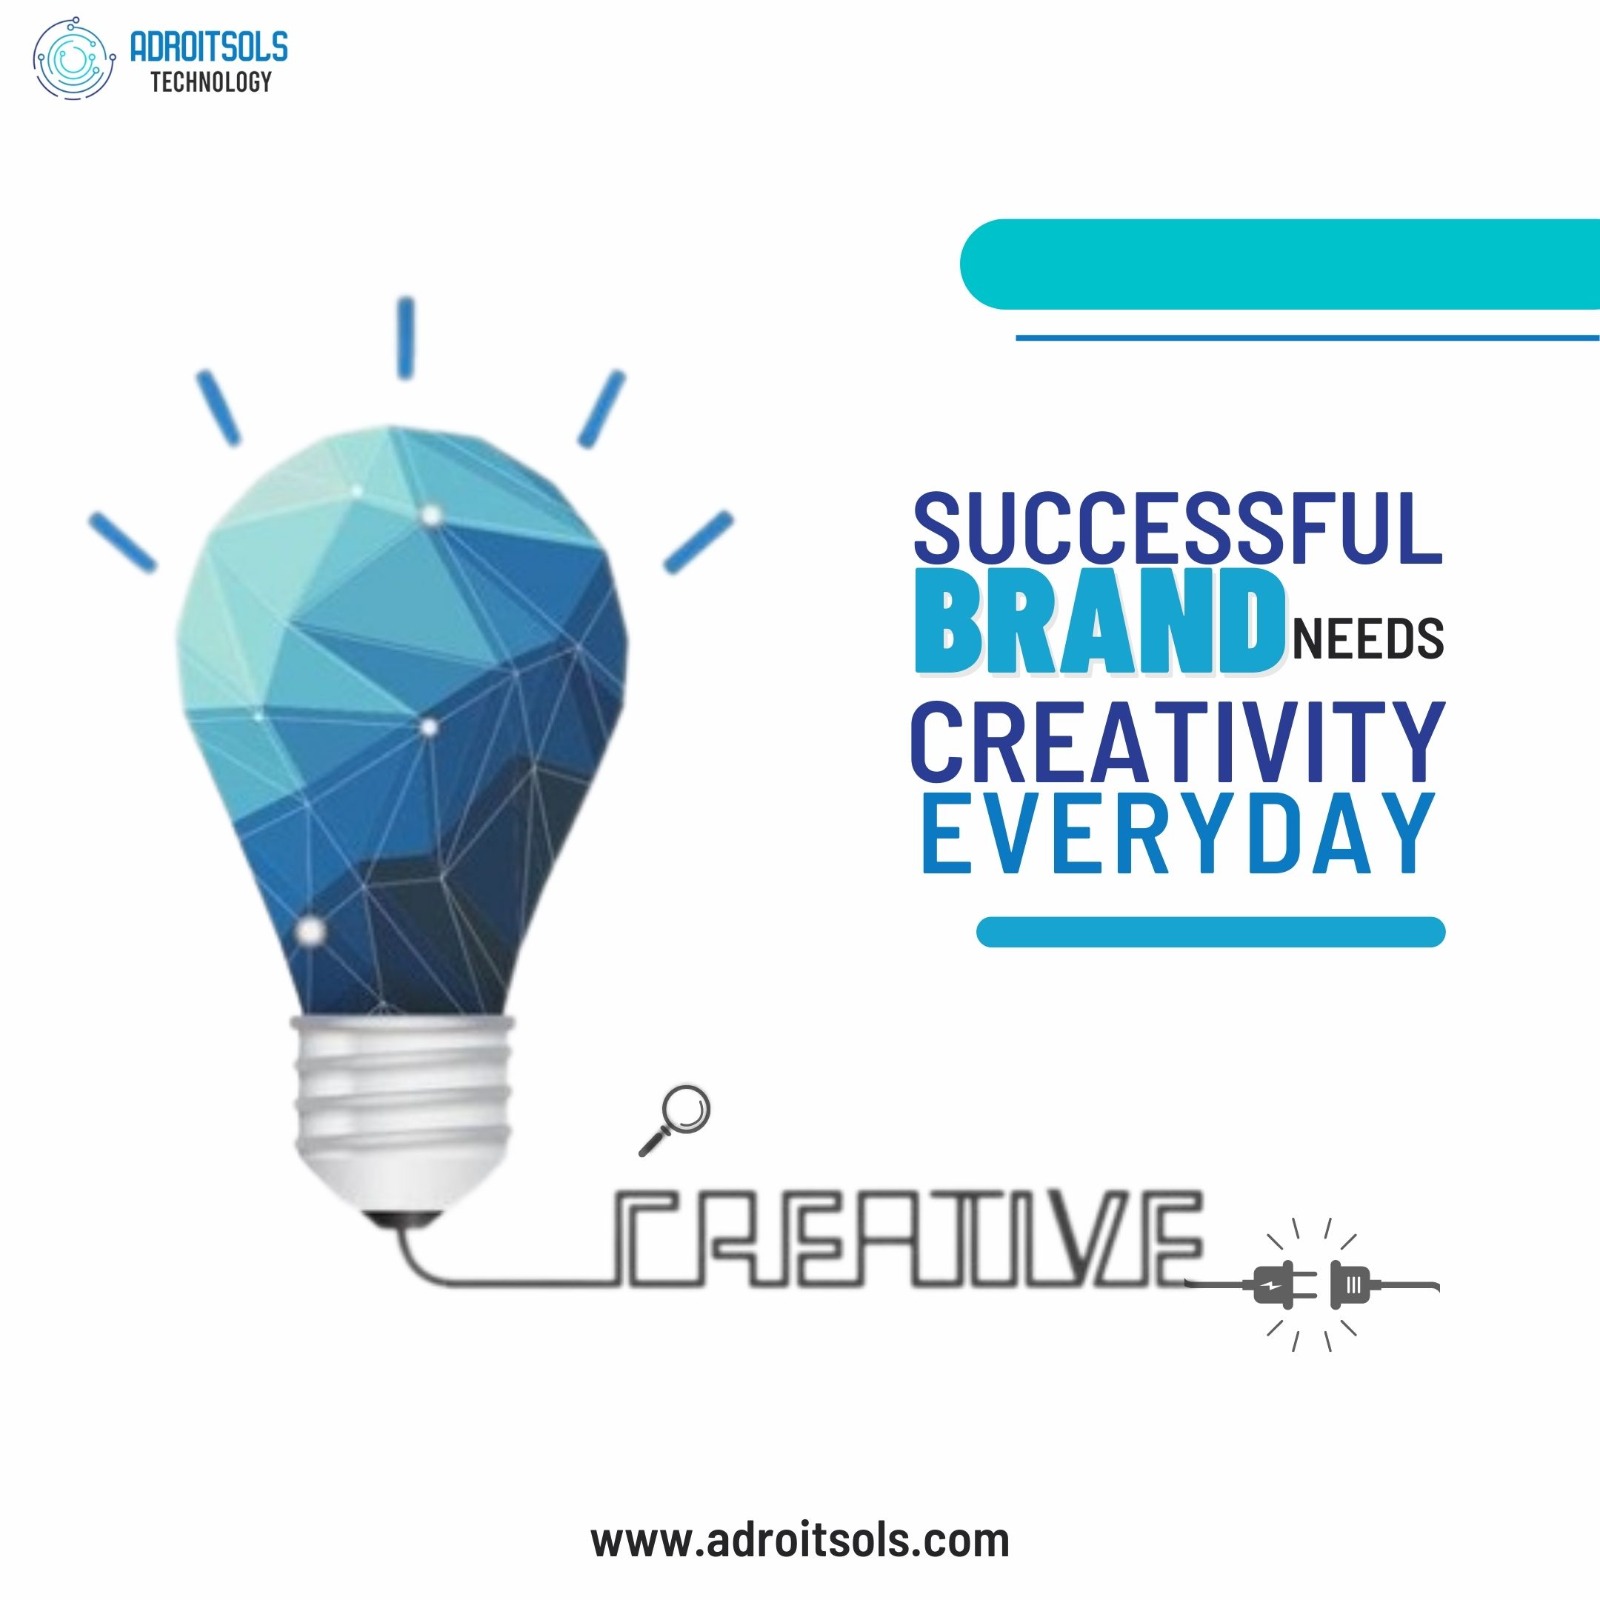 Graphic Designing Services in UK - Adroitsols Technology